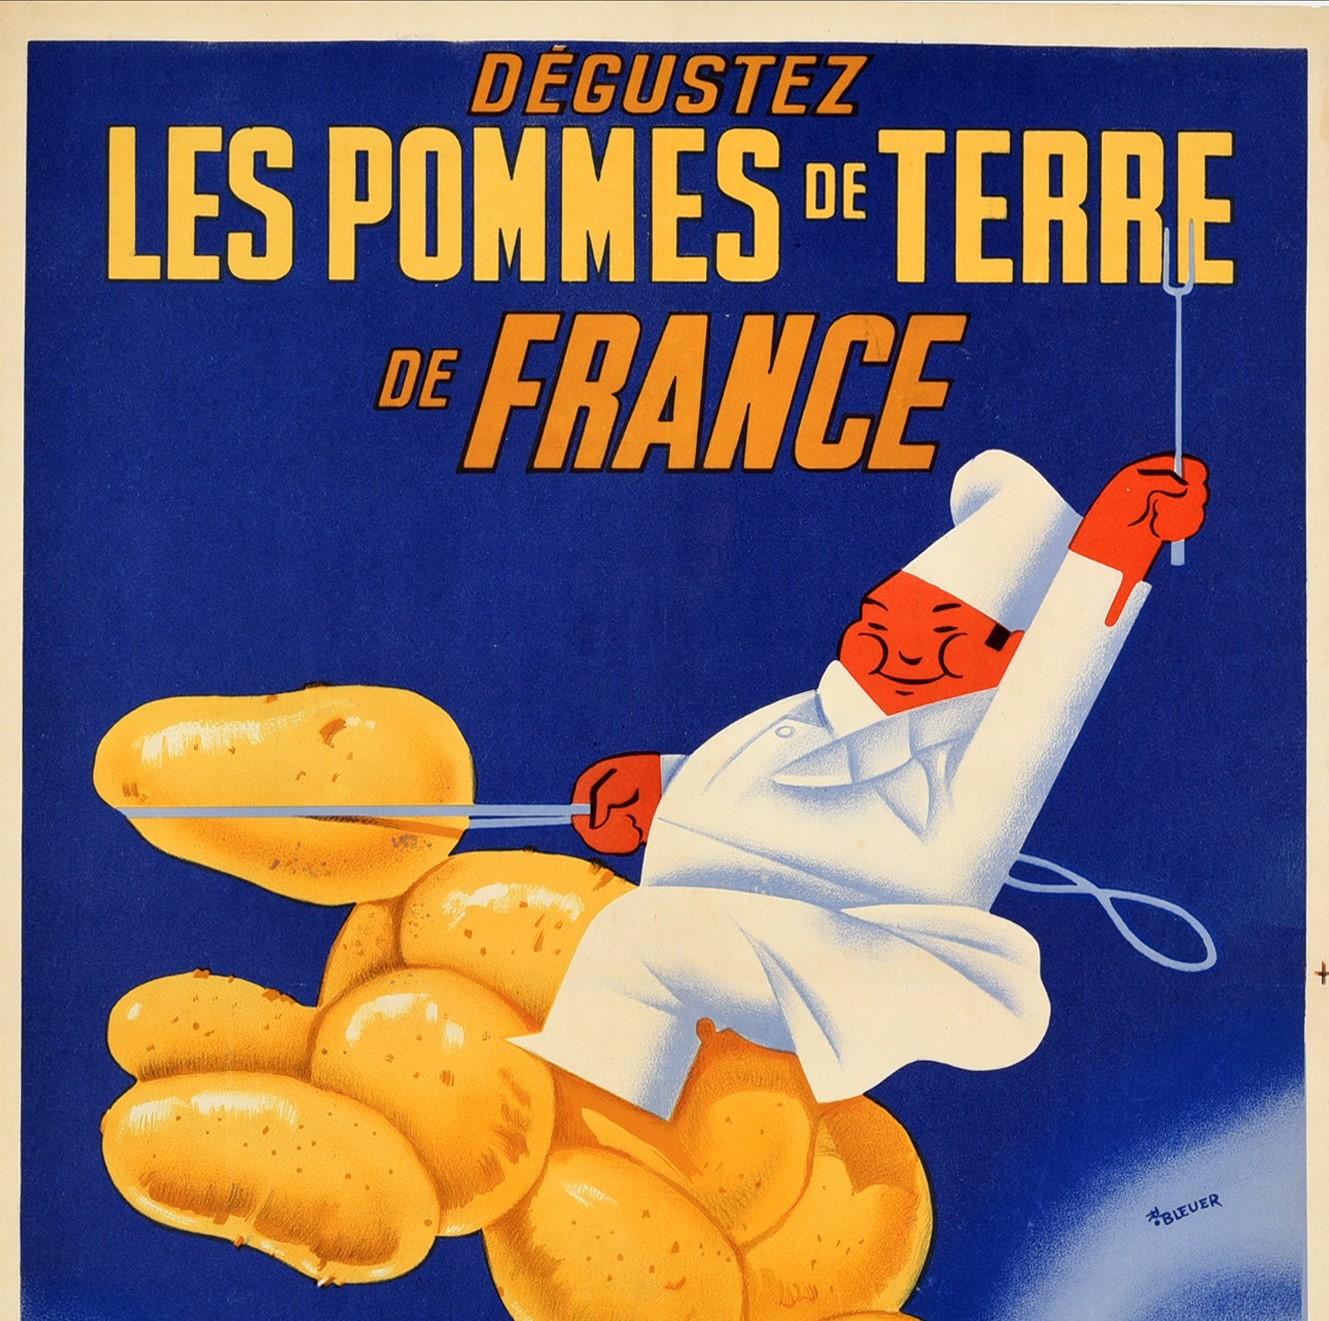 Original vintage food poster - Enjoy the Potatoes of France / Degustez Les Pommes De Terre De France - featuring a fun and colourful illustration of a smiling chef wearing a white uniform and hat and holding up a cooking fork while riding a horse